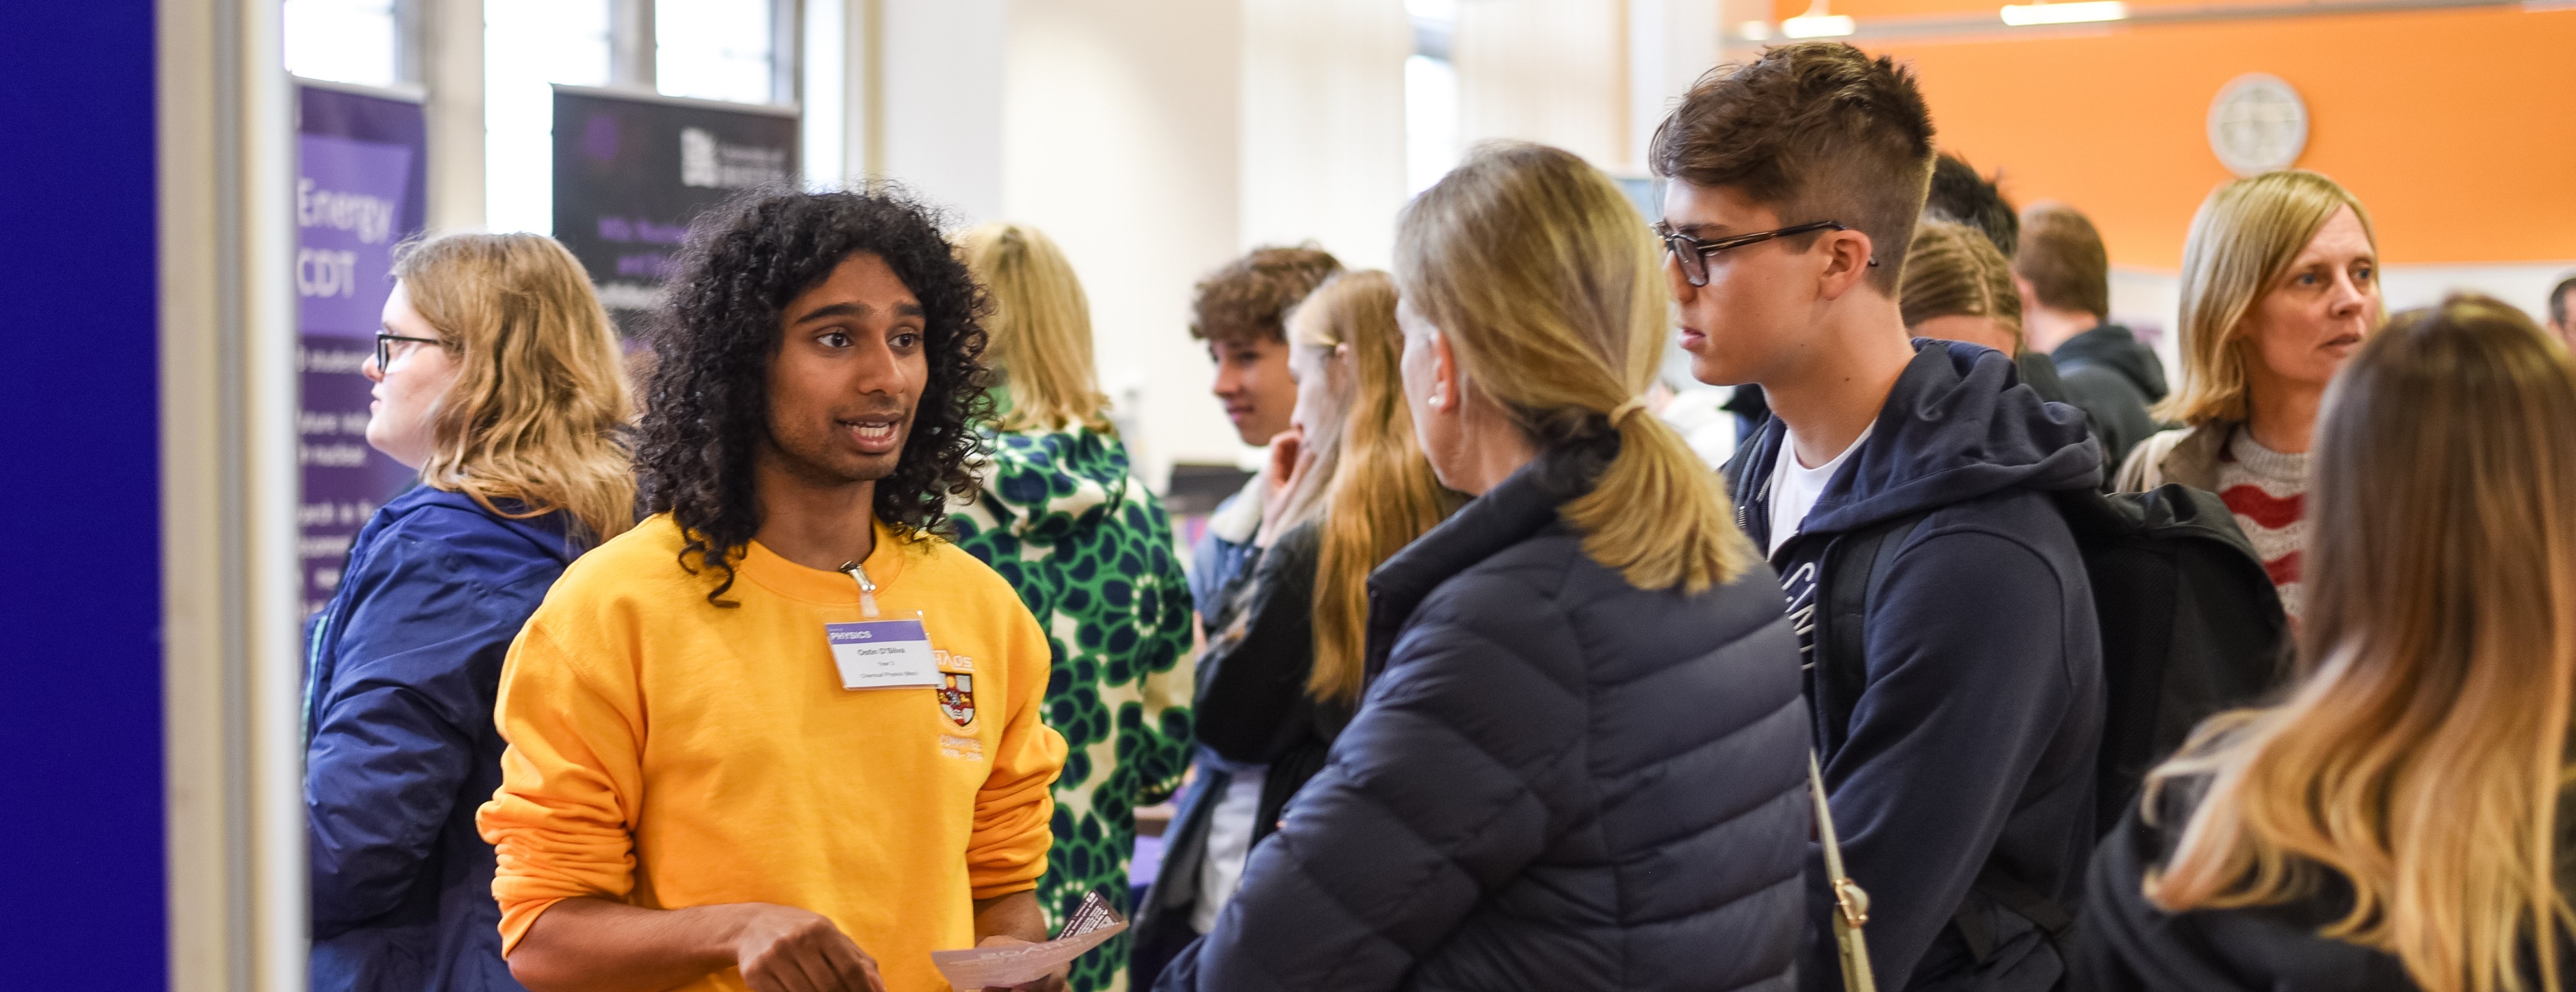 Student talks to prospective student at an Open Day event. In the background there are other prospective students and their parents walking about.